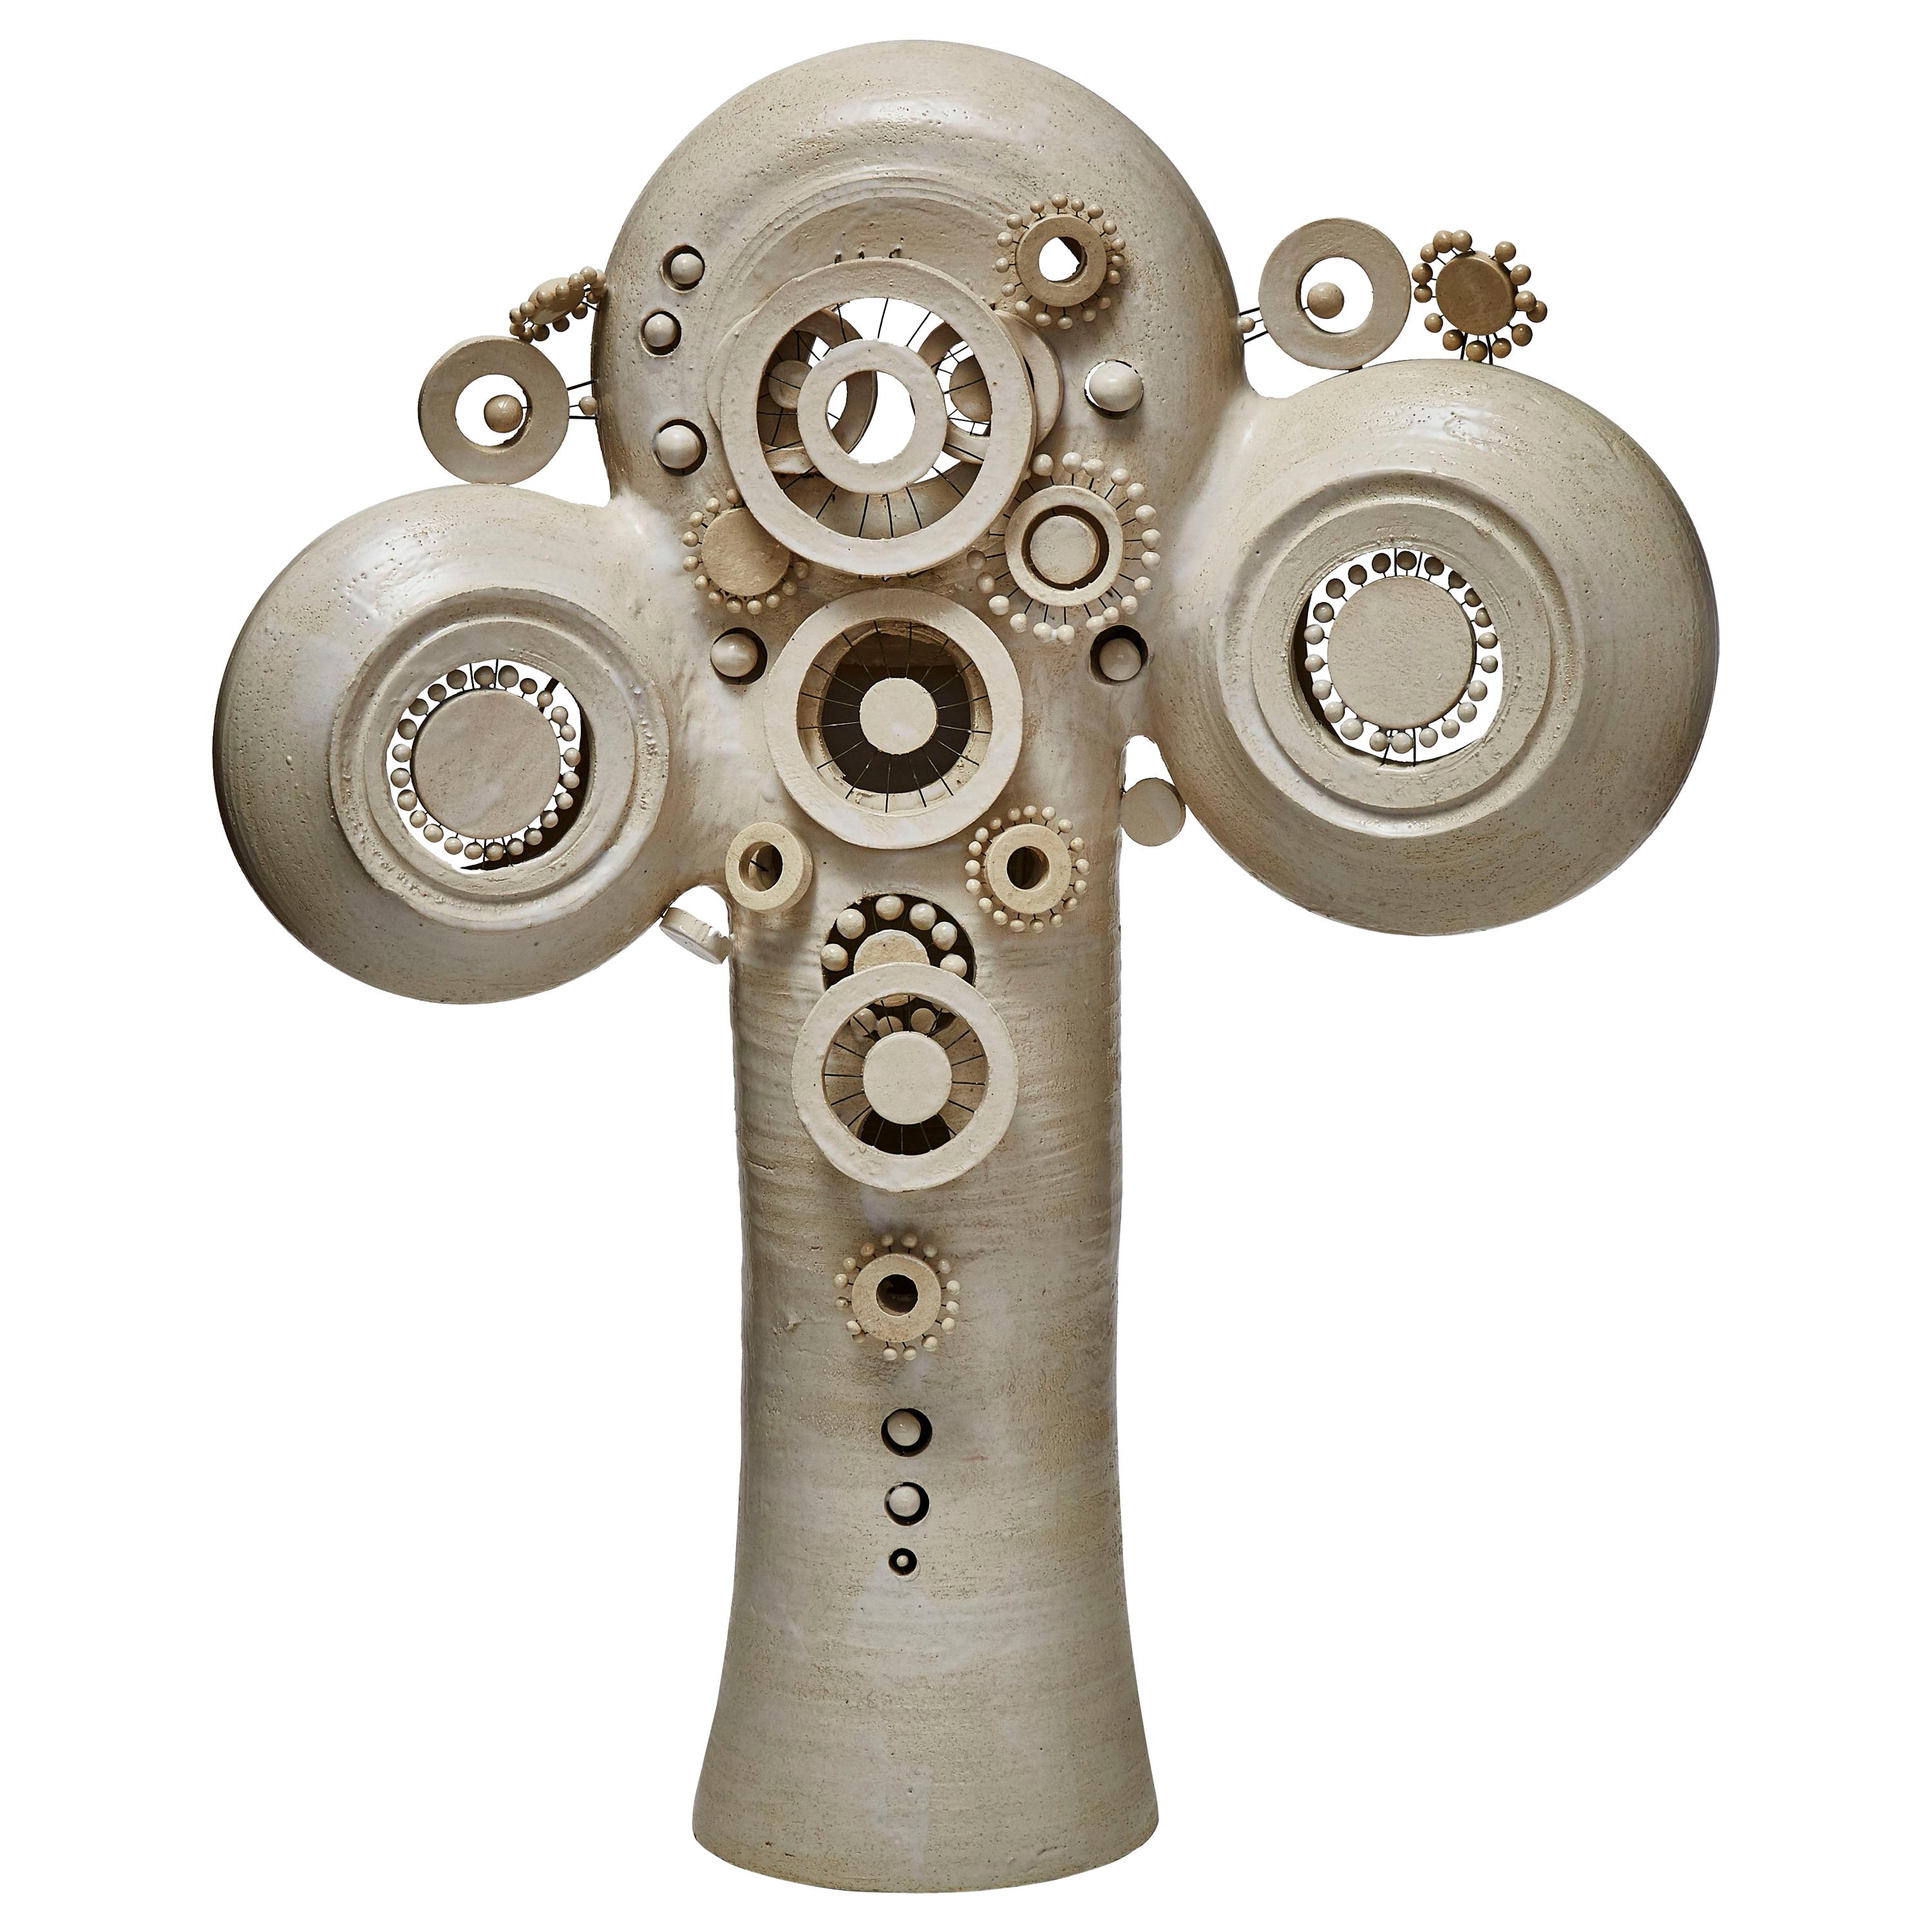 Glazed Ceramic Totem Table Lamp by French Artist Georges Pelletier